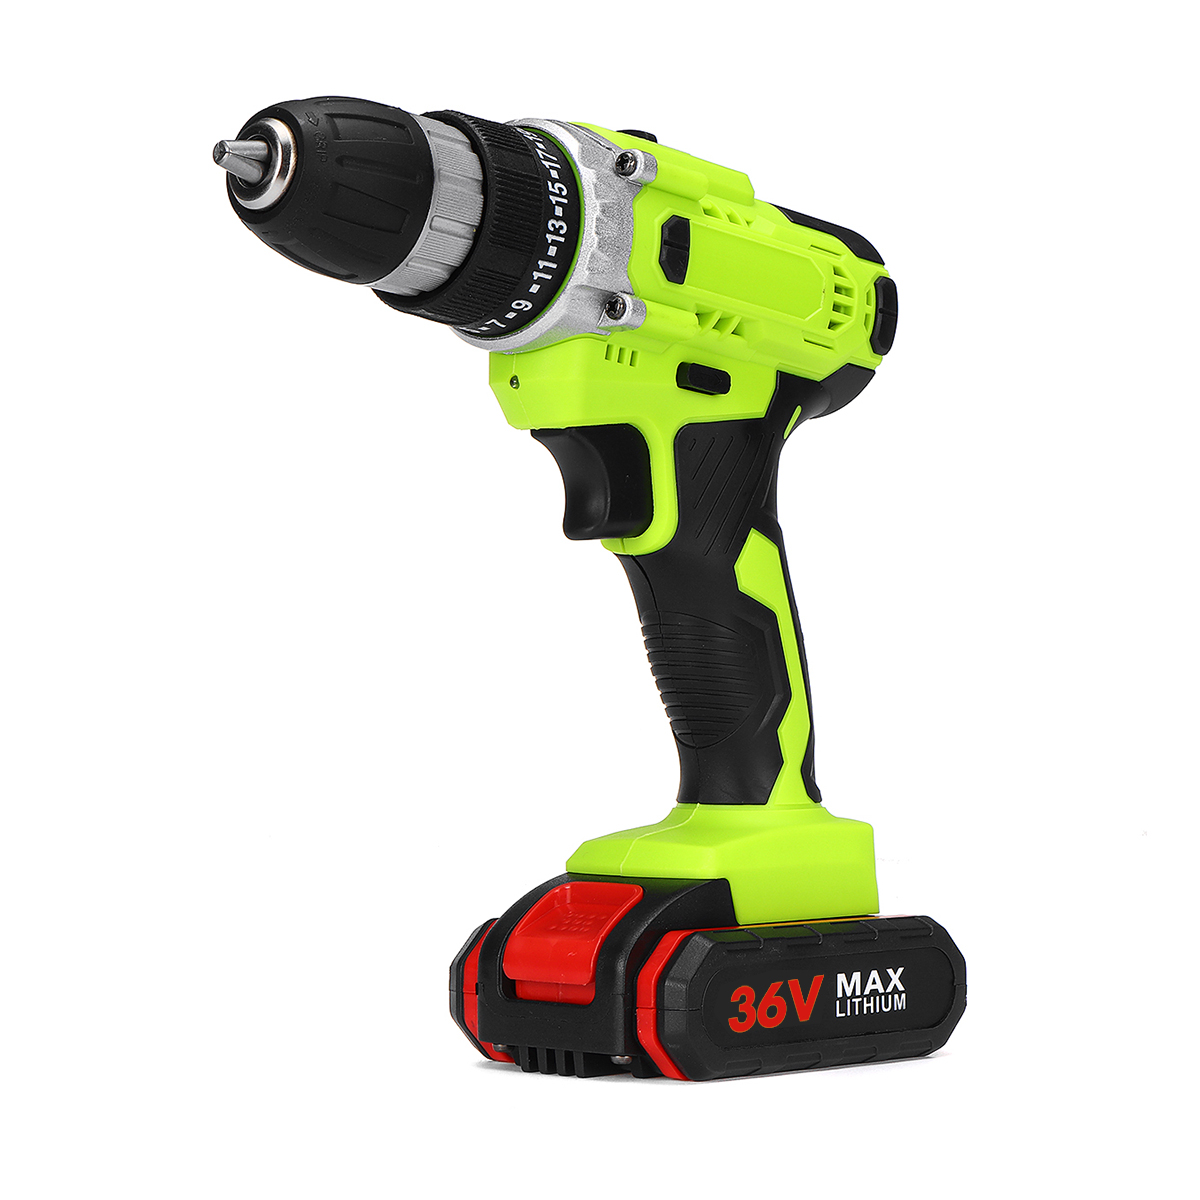 38-Inch-UK-Plug-Multifunctional-Cordless-Drill-Chuck-Impact-Drilling-Tool-Electric-Drill-1943466-17